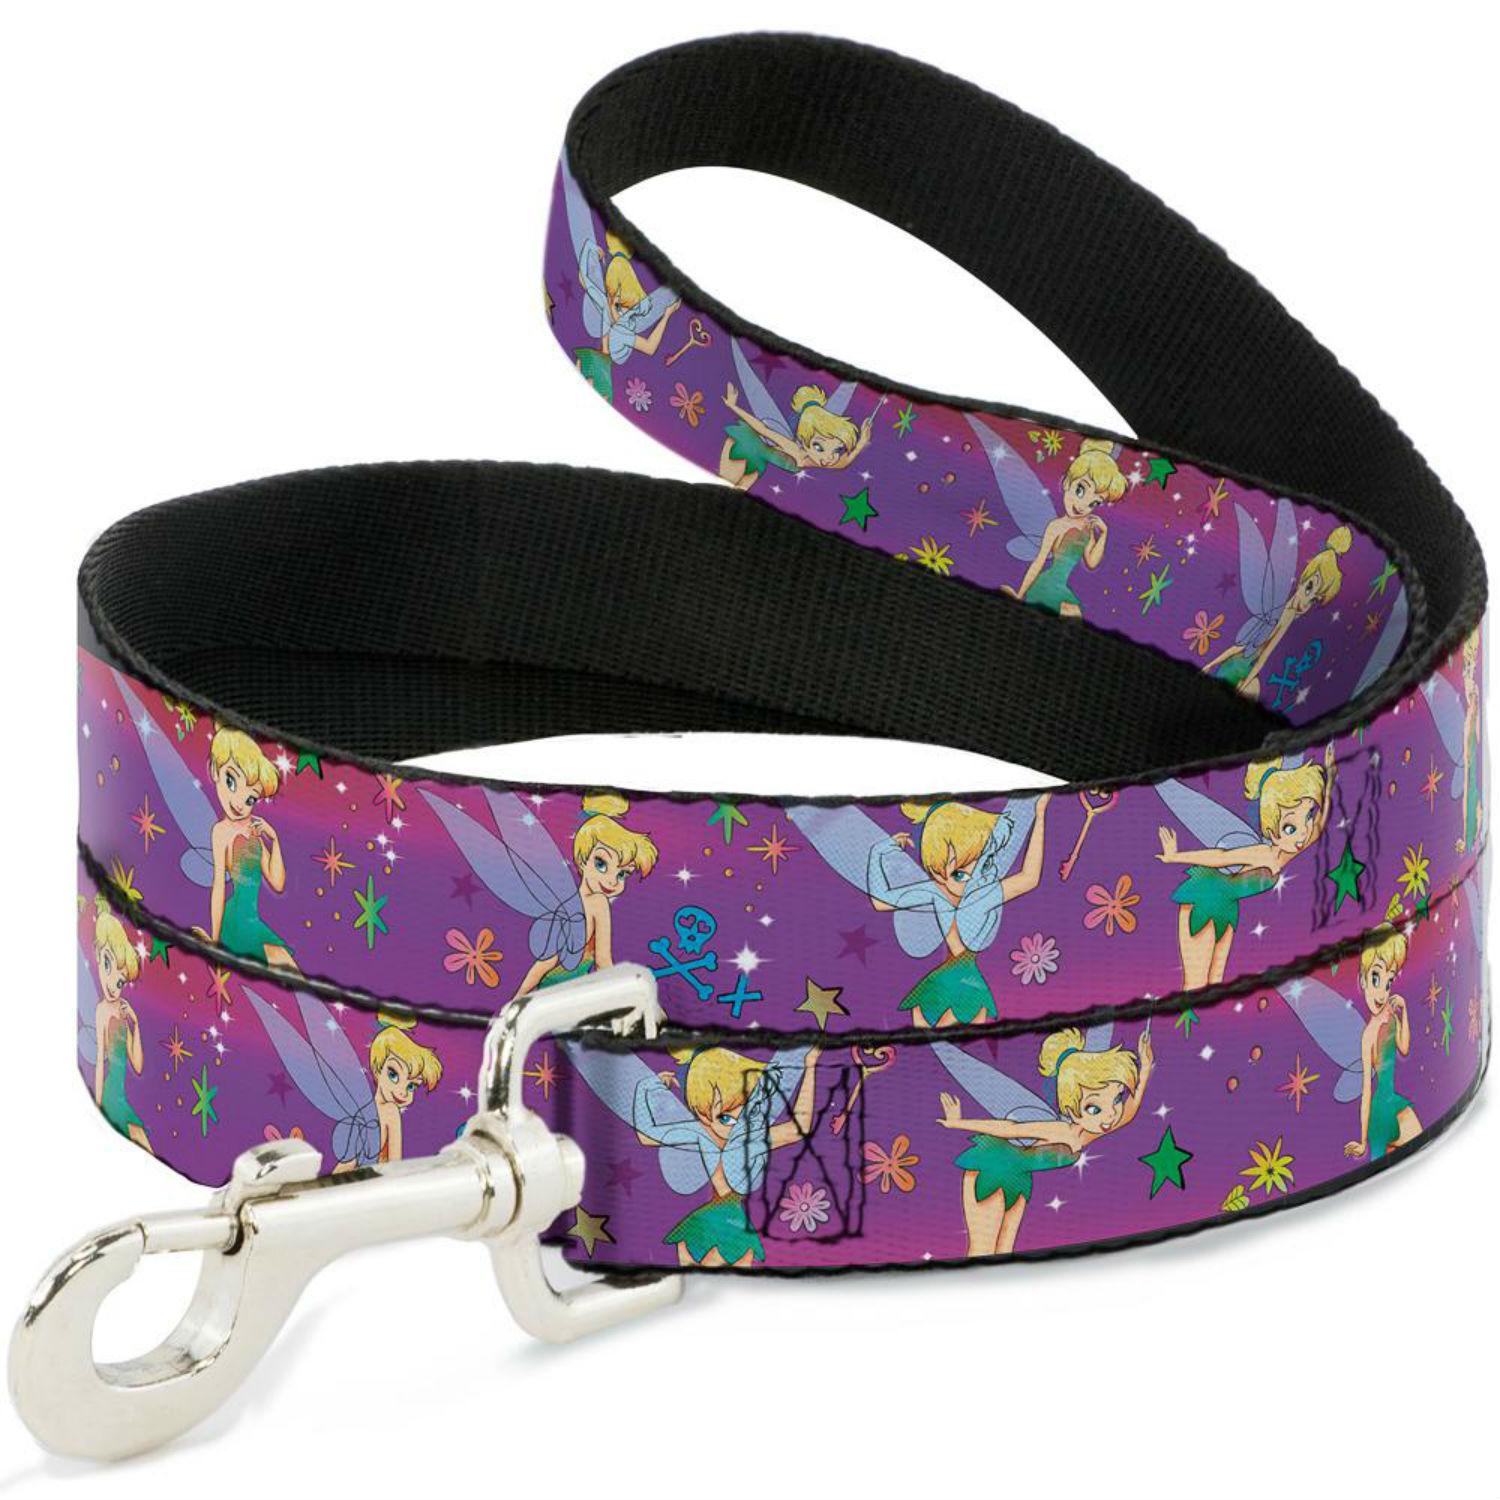 Tinkerbell Flower and Stars Dog Leash by Buckle-Down - Purple